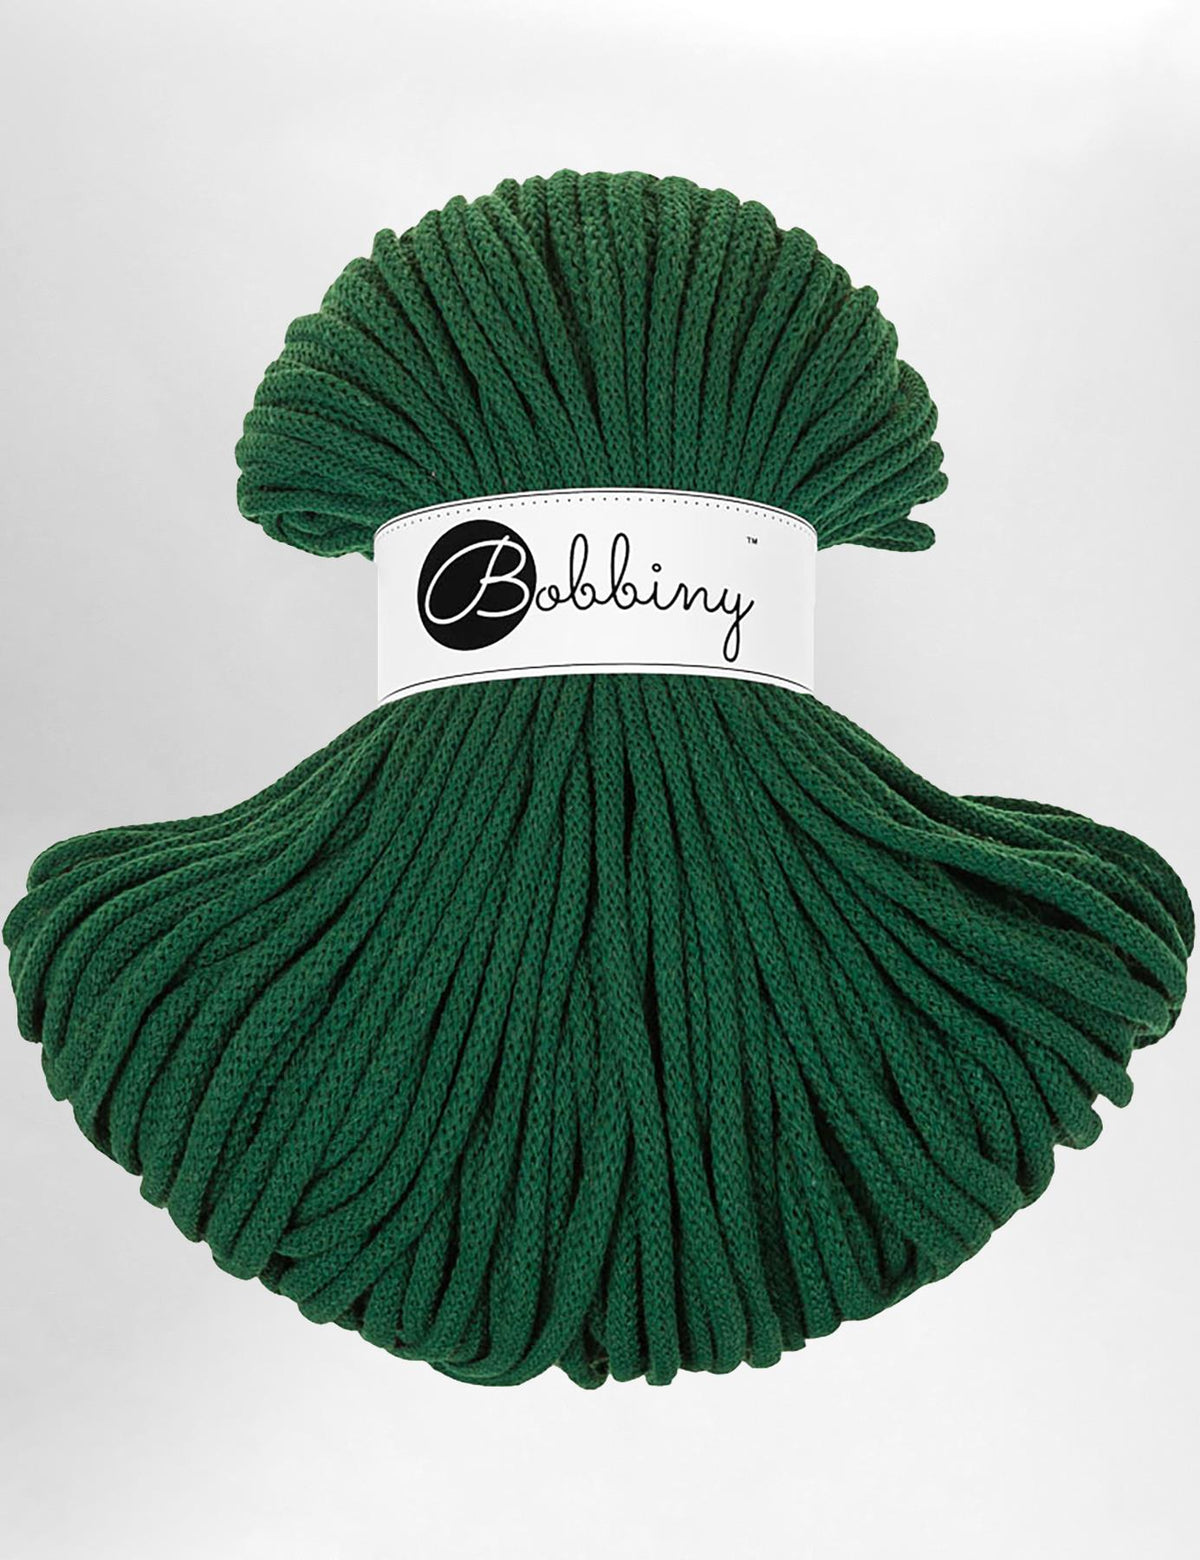 5mm Pine green recycled cotton macrame cord by Bobbiny (100m)